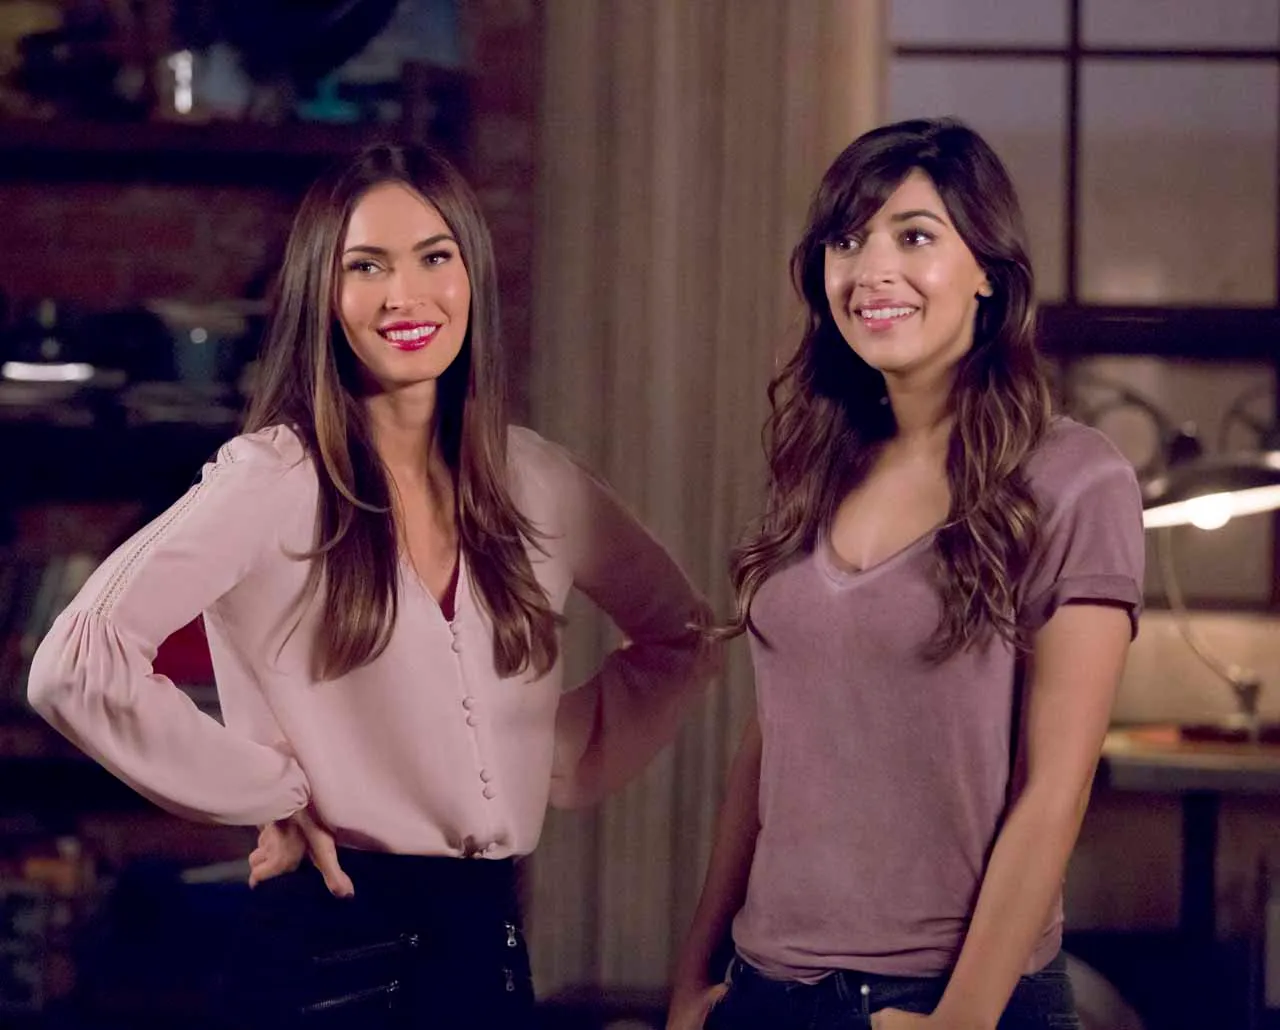 NEW GIRL: L-R: Guest star Megan Fox and Hannah Simone in the "Reagan" episode of NEW GIRL airing Tuesday, Feb. 9 (8:00-8:30 PM ET/PT) on FOX. Â©2016 Fox Broadcasting Co. Cr: Ray Mickshaw/FOX